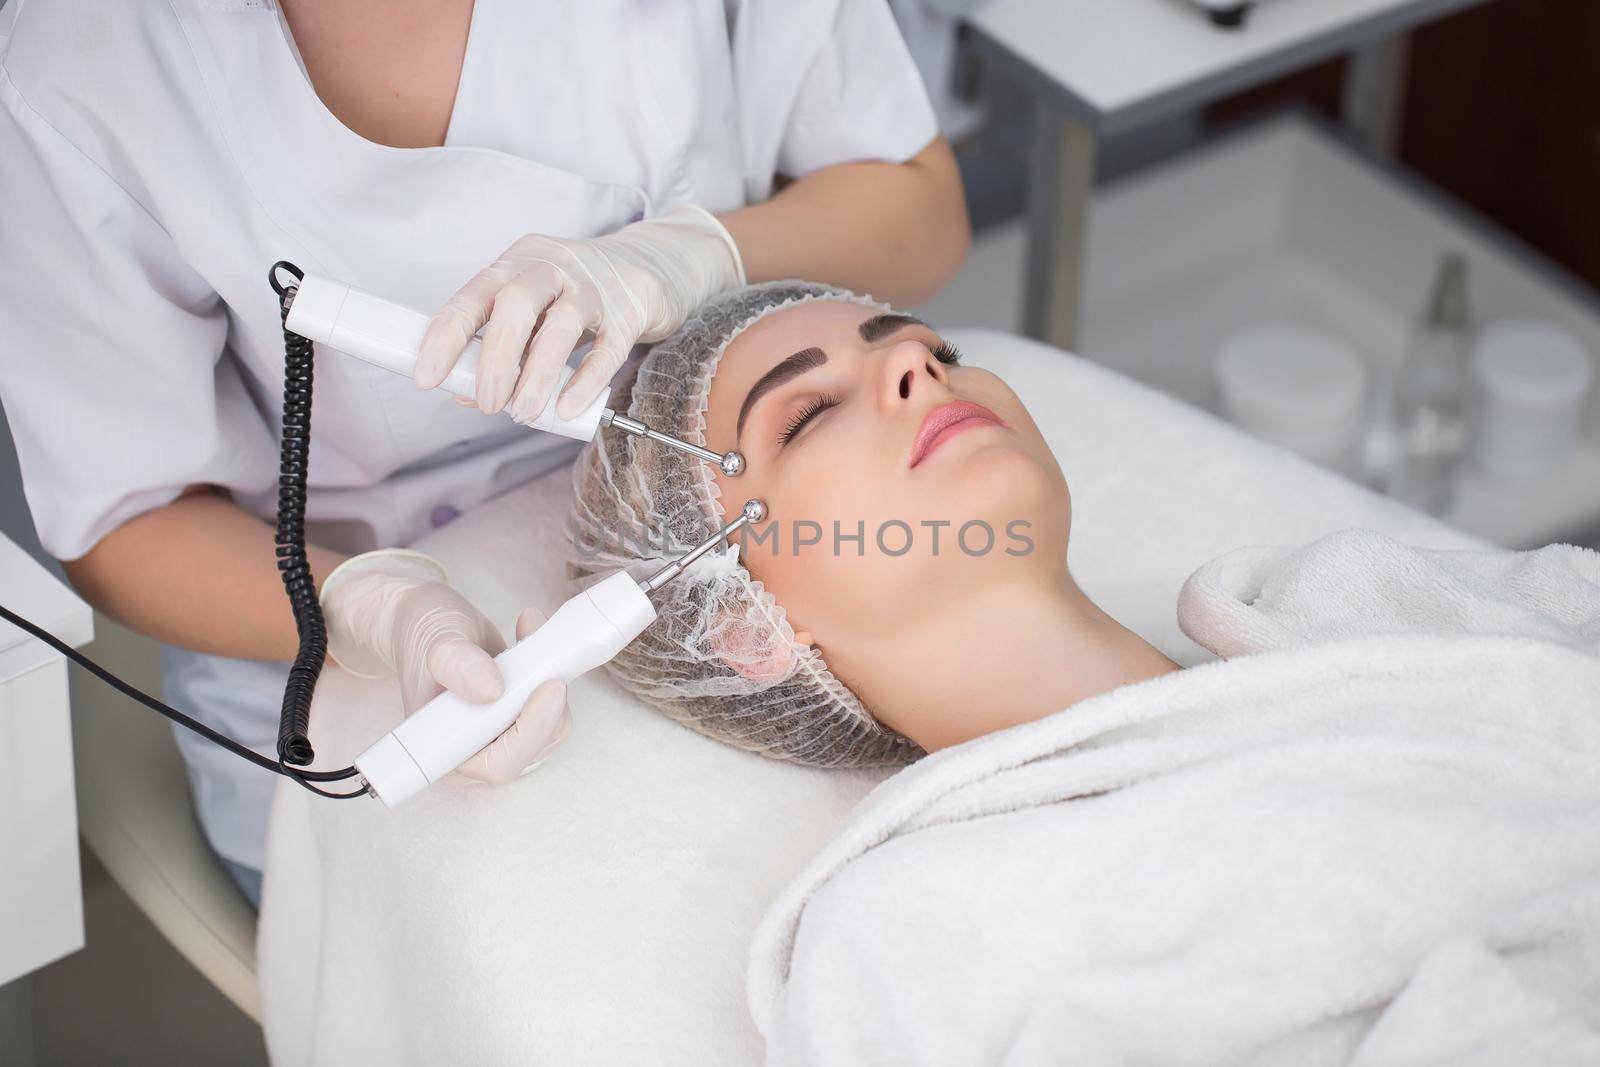 Macro close up portrait of woman having cosmetic galvanic beauty treatment in spa.Therapist applying low frequency current with electrodes on face. by StudioPeace